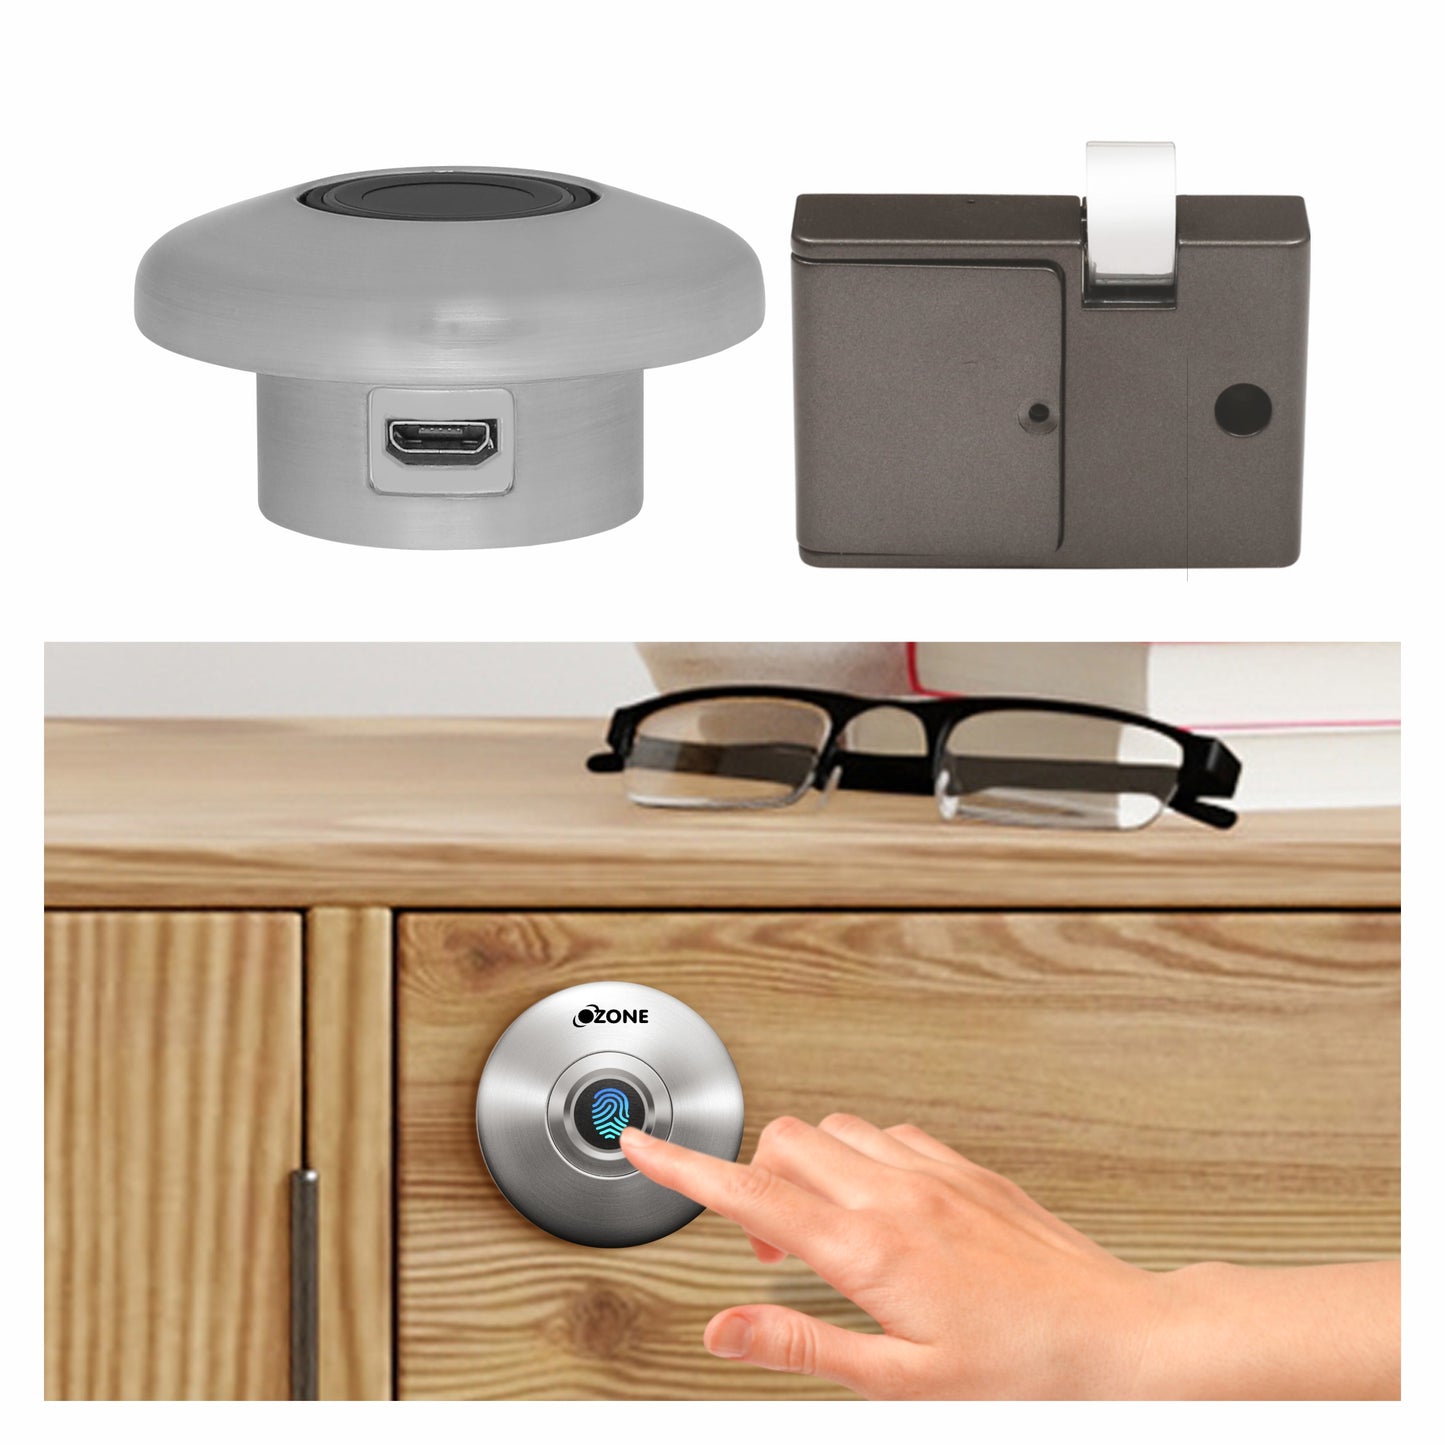 Ozone 55-F Smart Furniture Lock with Fingerprint Access for Wooden Cabinets, Wardrobes & Drawers